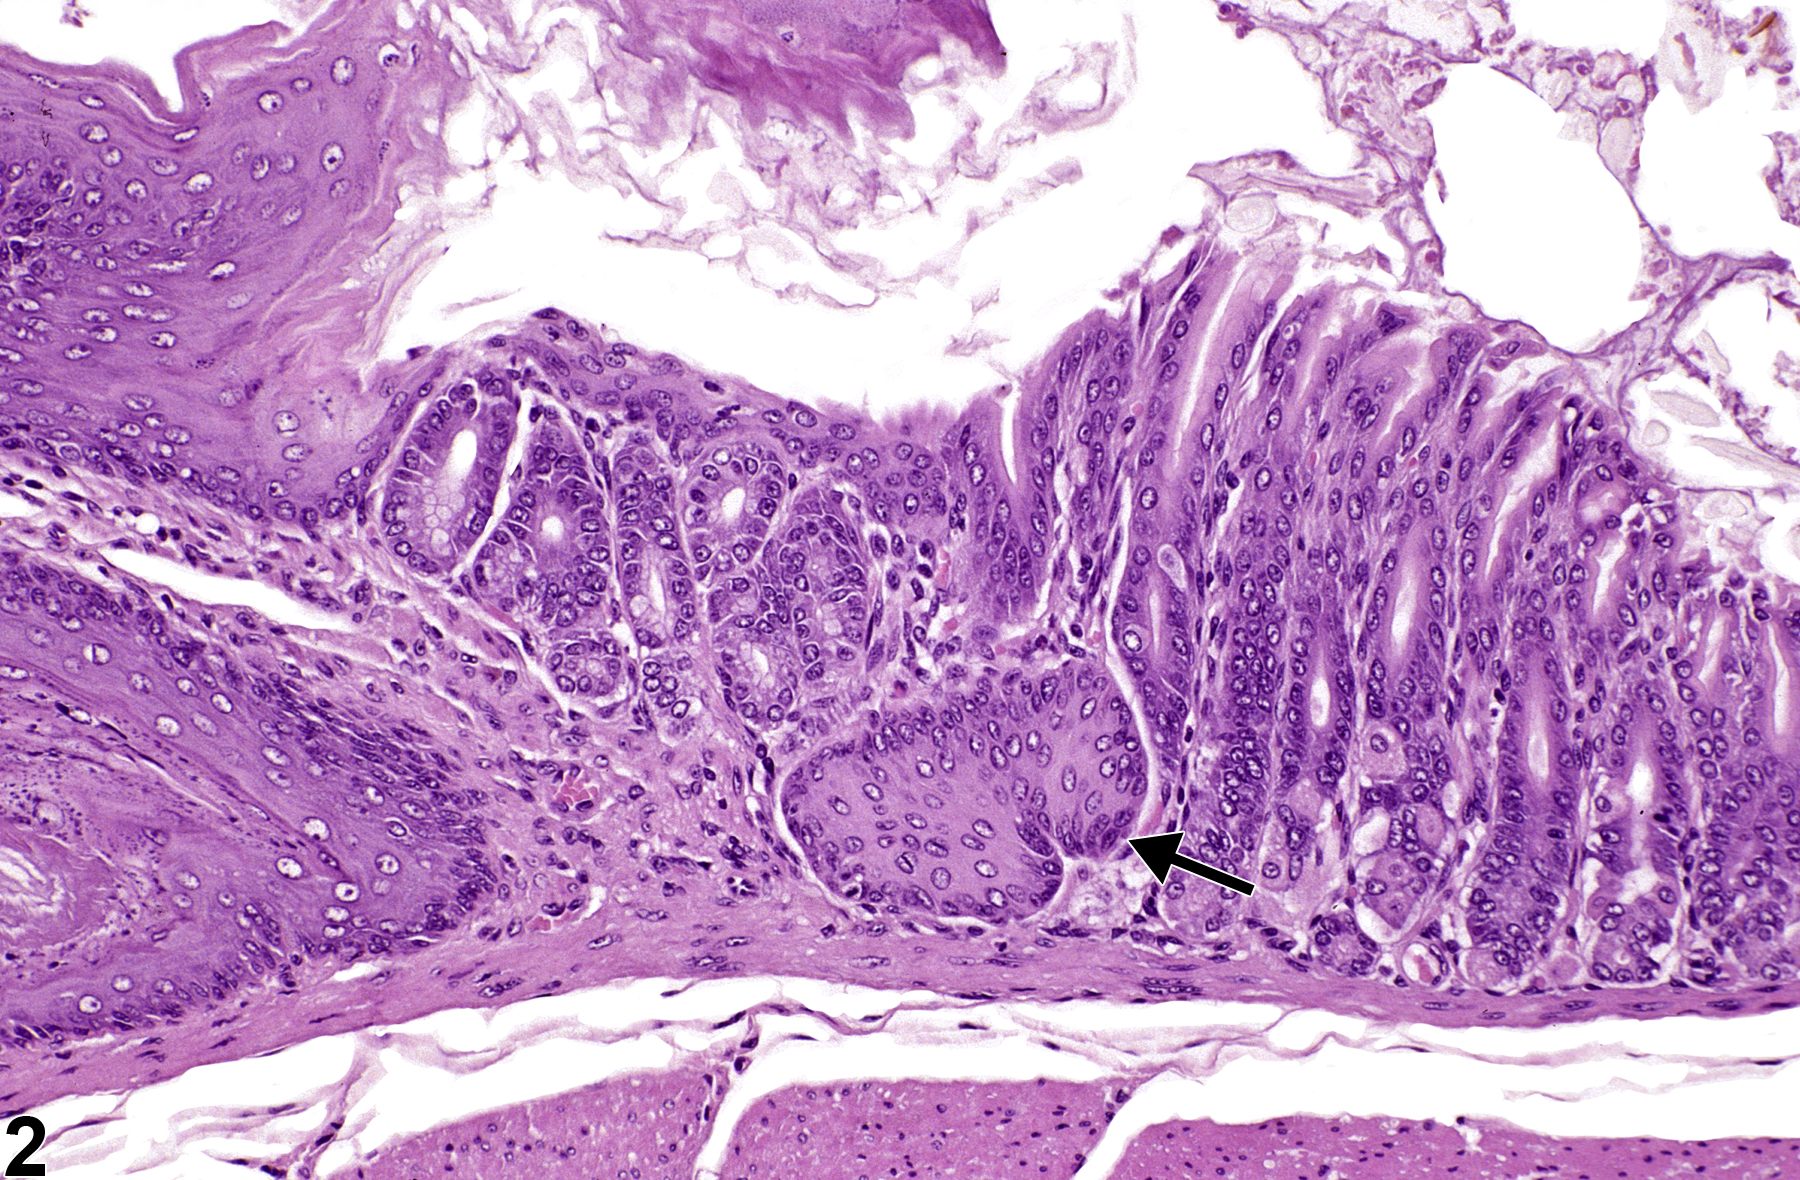 Image of metaplasia, squamous in the glandular stomach from a male B6C3F1 mouse in a chronic study